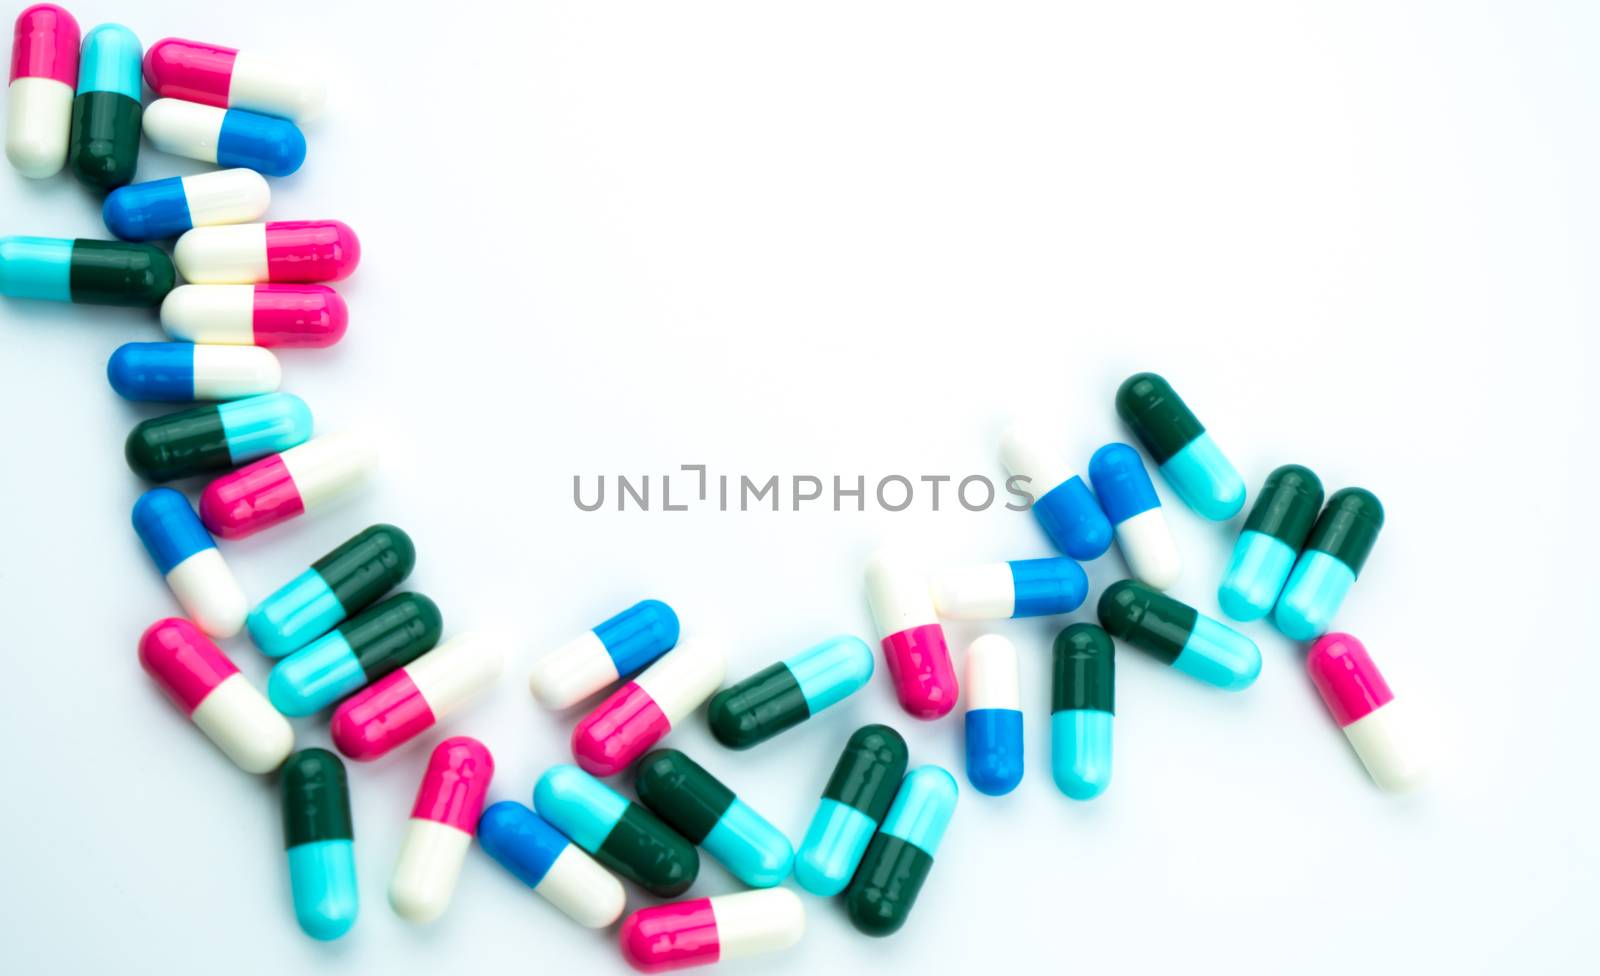 Colorful of antibiotic capsules pills isolated on white background with copy space. Drug resistance, antibiotic drug use with reasonable, health policy and health insurance concept. Pharmaceutical industry. Pharmacy background.